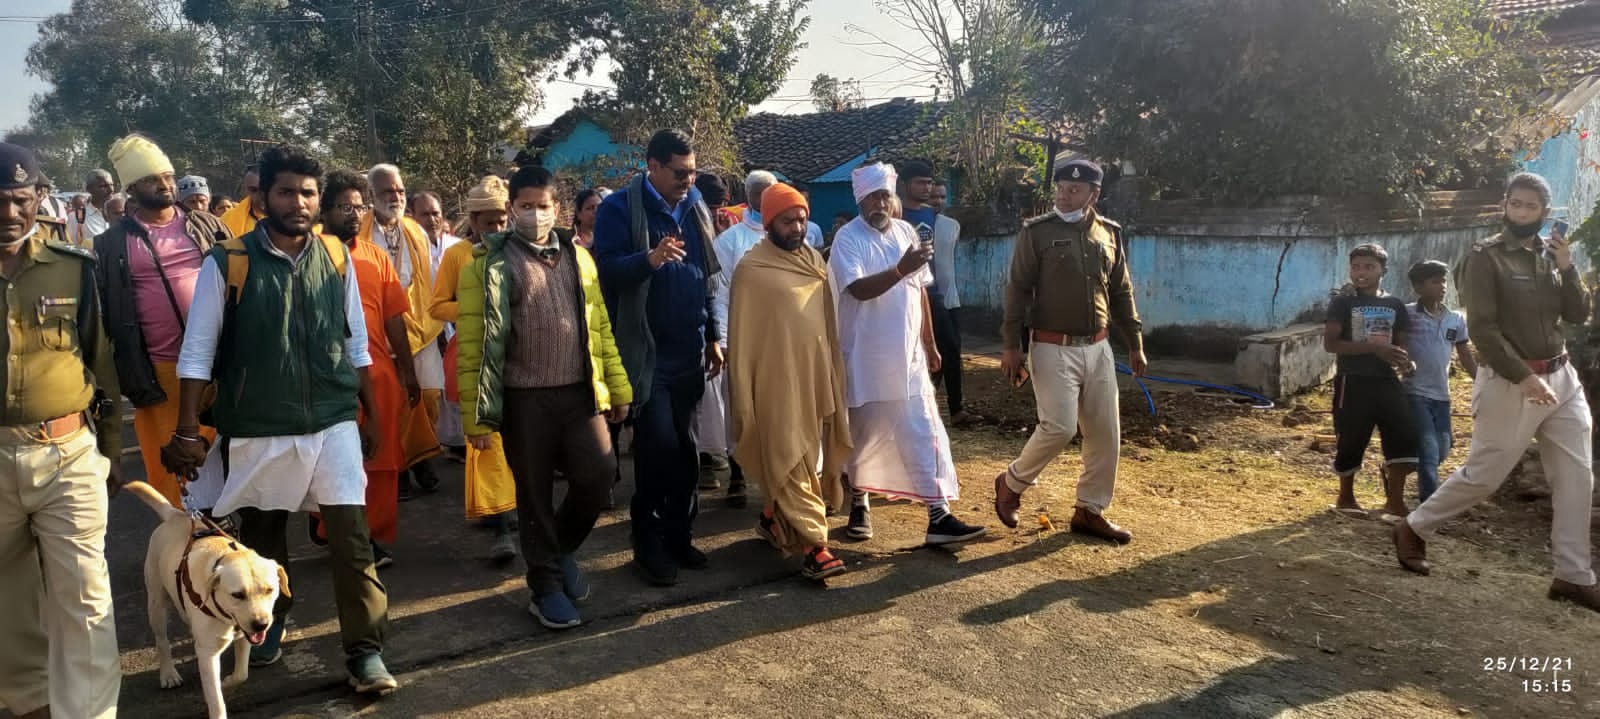 The judge walked with Mahamandaleshwar, the journey reached garbage